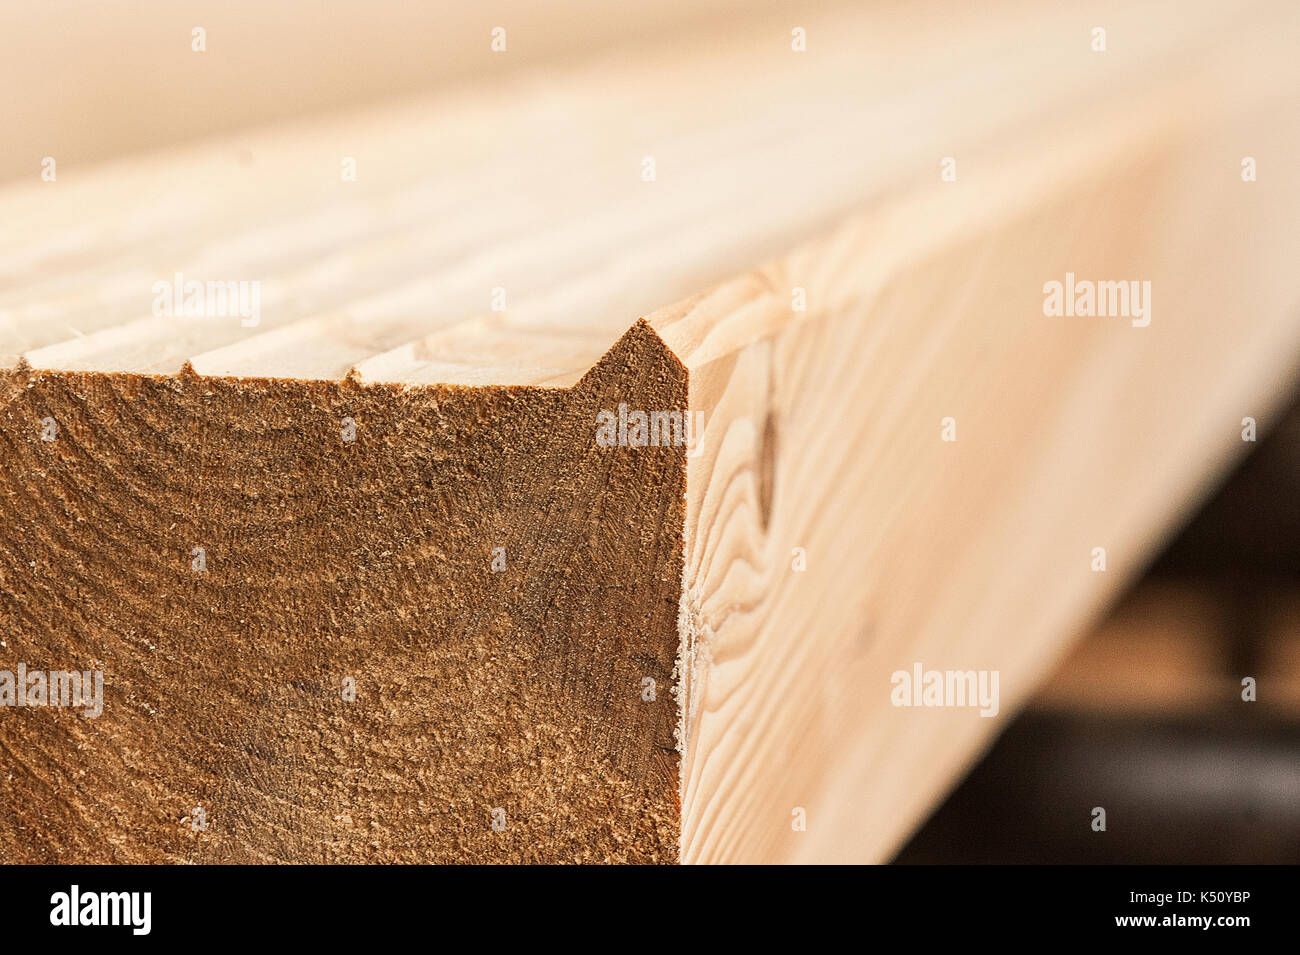 lumber industrial wood texture, timber butts background. Butt end of a processed wooden beam. close Stock Photo